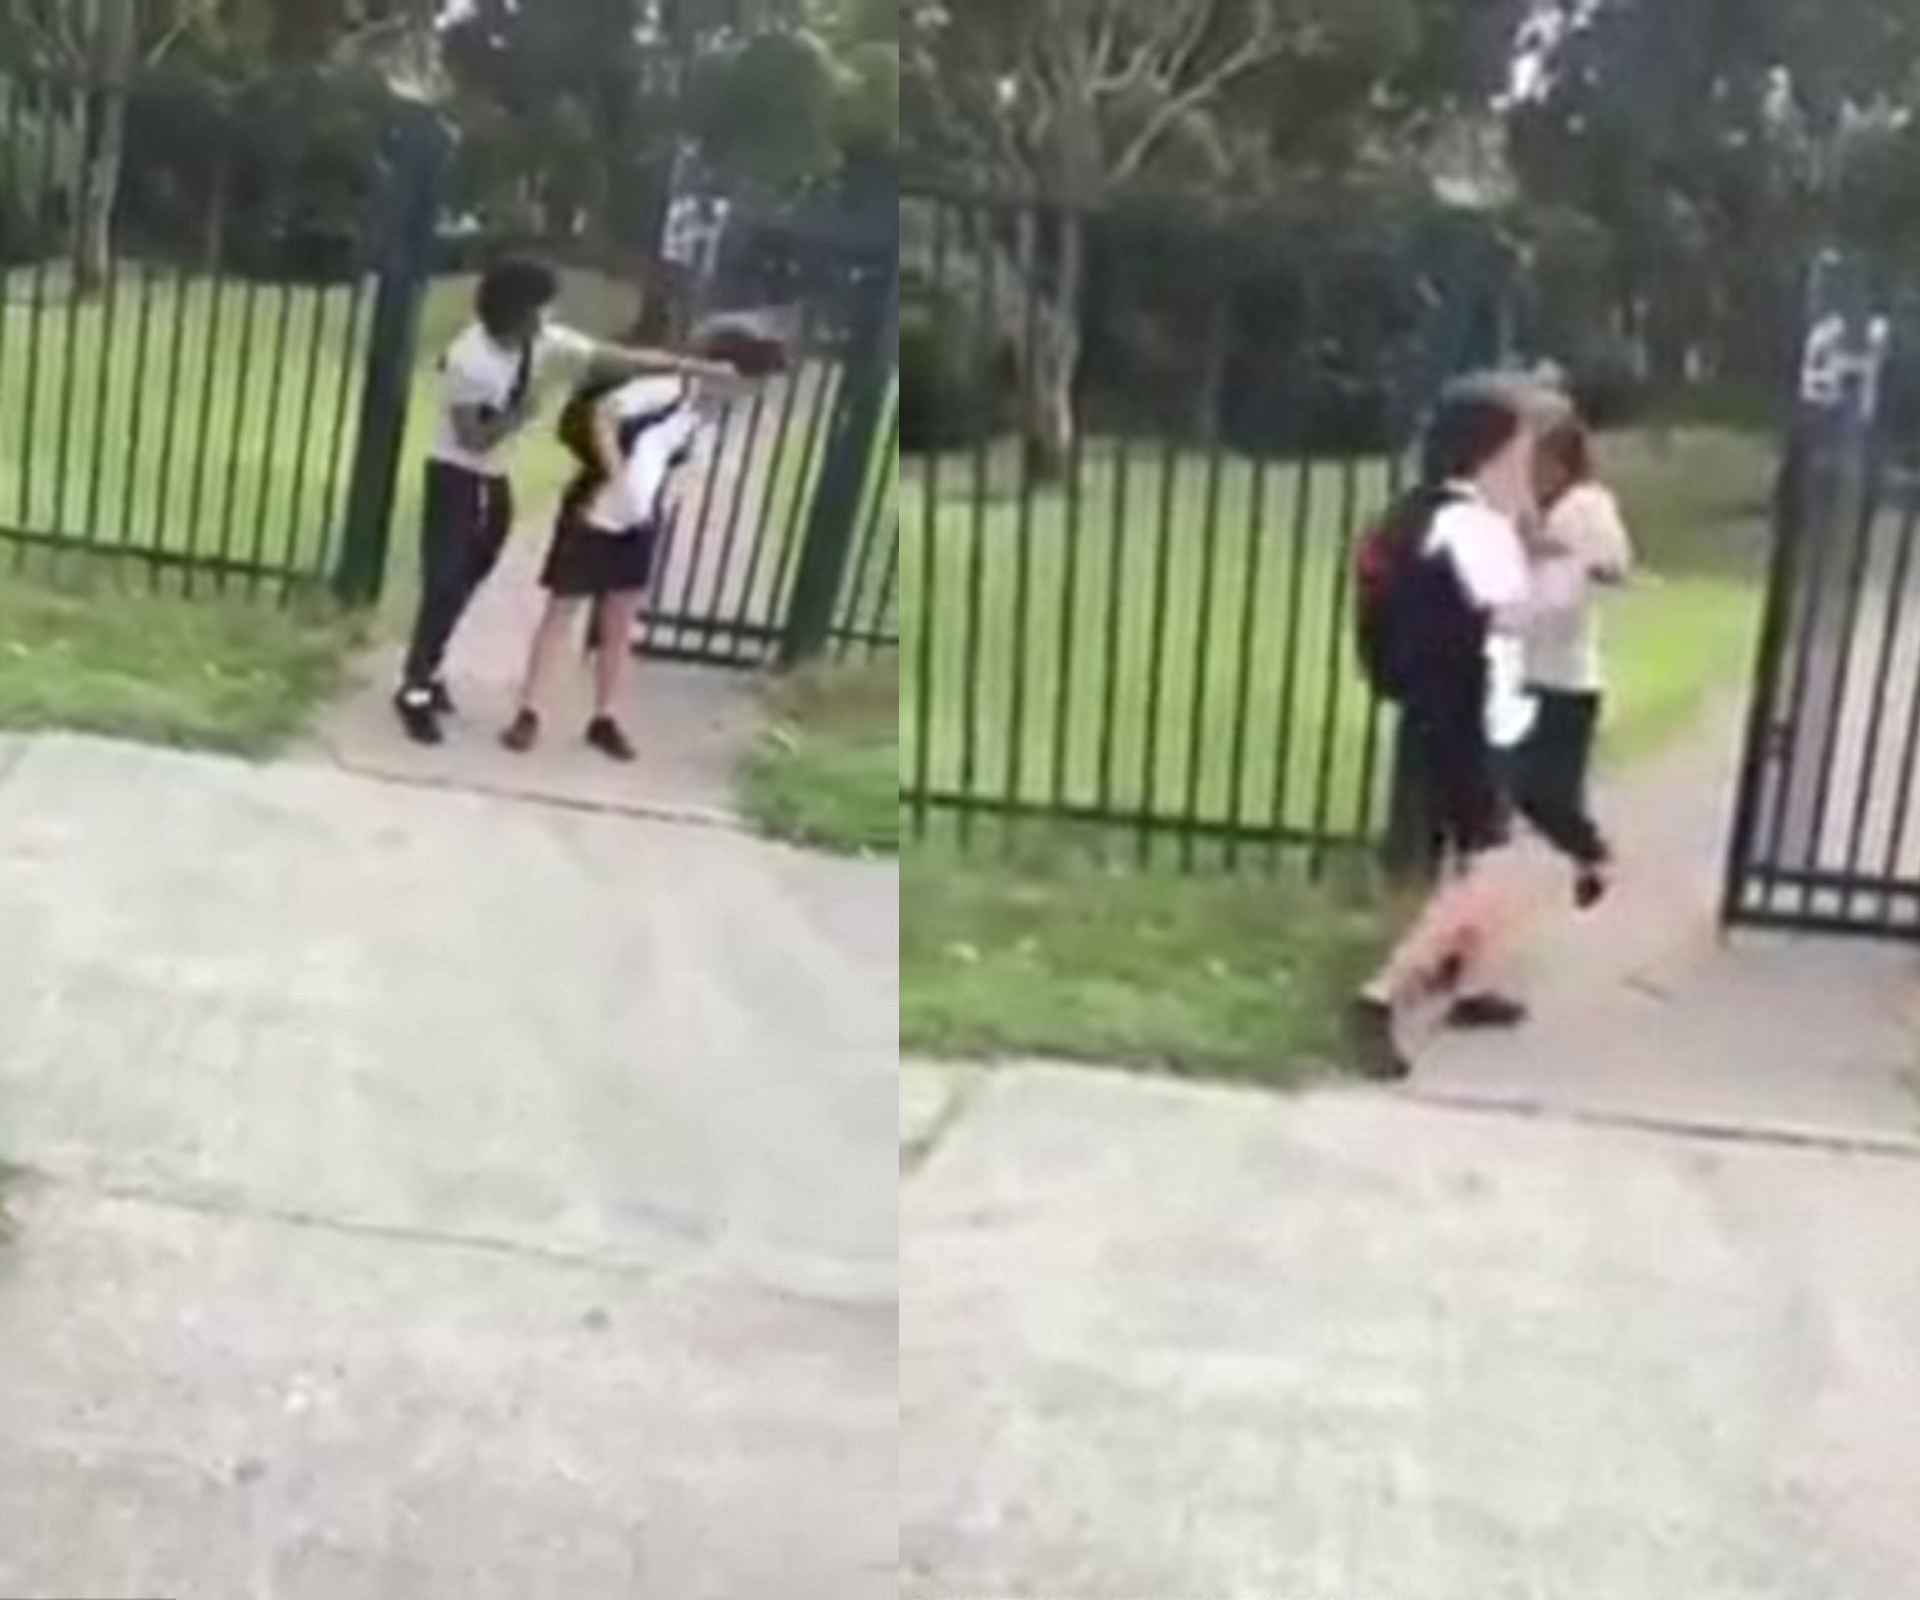 Bullying victim’s heartbreaking question during violent attack